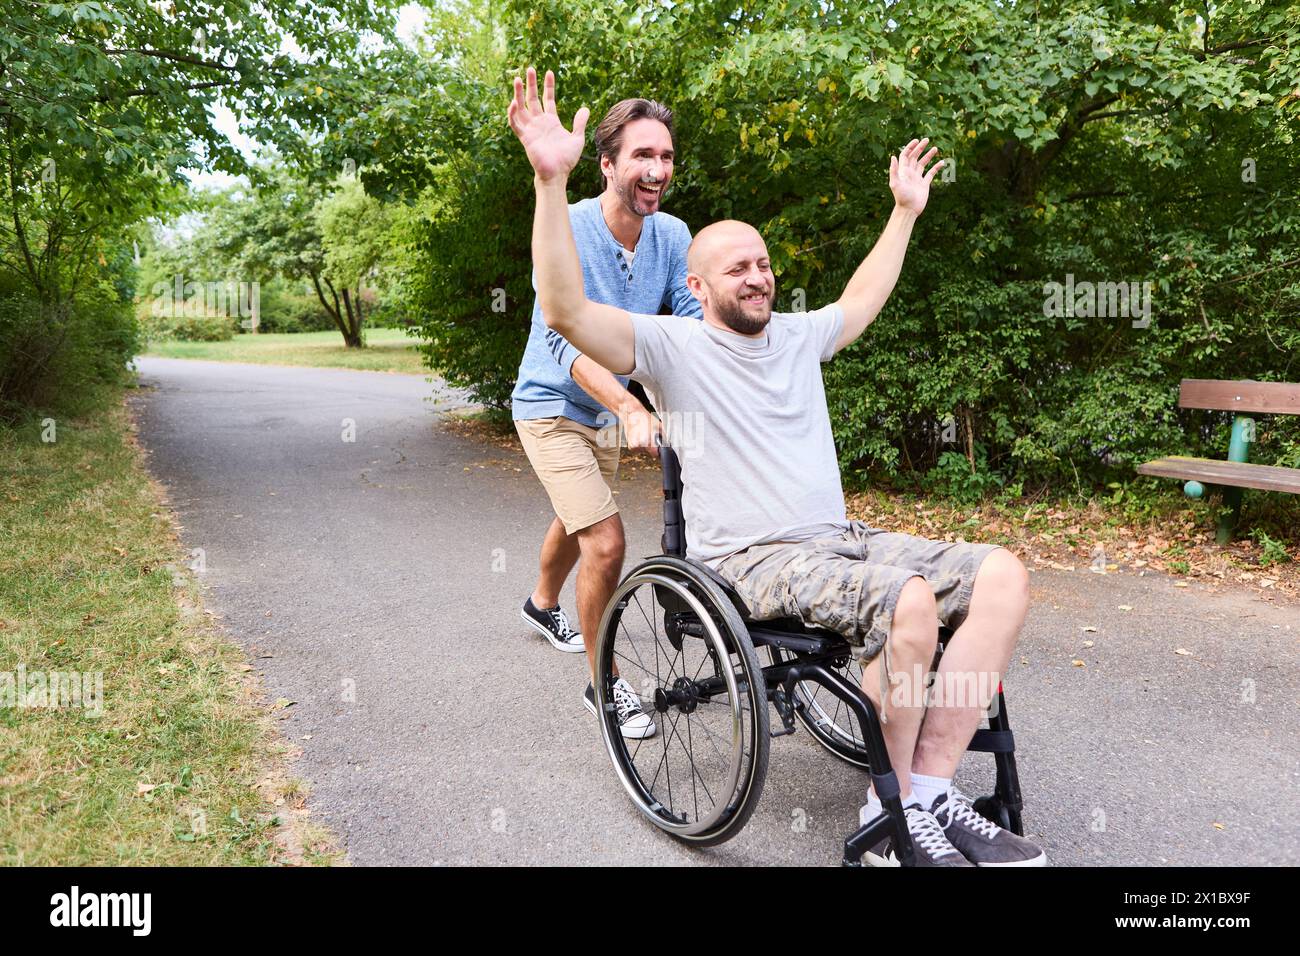 A person who uses a wheelchair and his companion are having a joyful time together outdoors, expressing happiness and friendship. Stock Photo